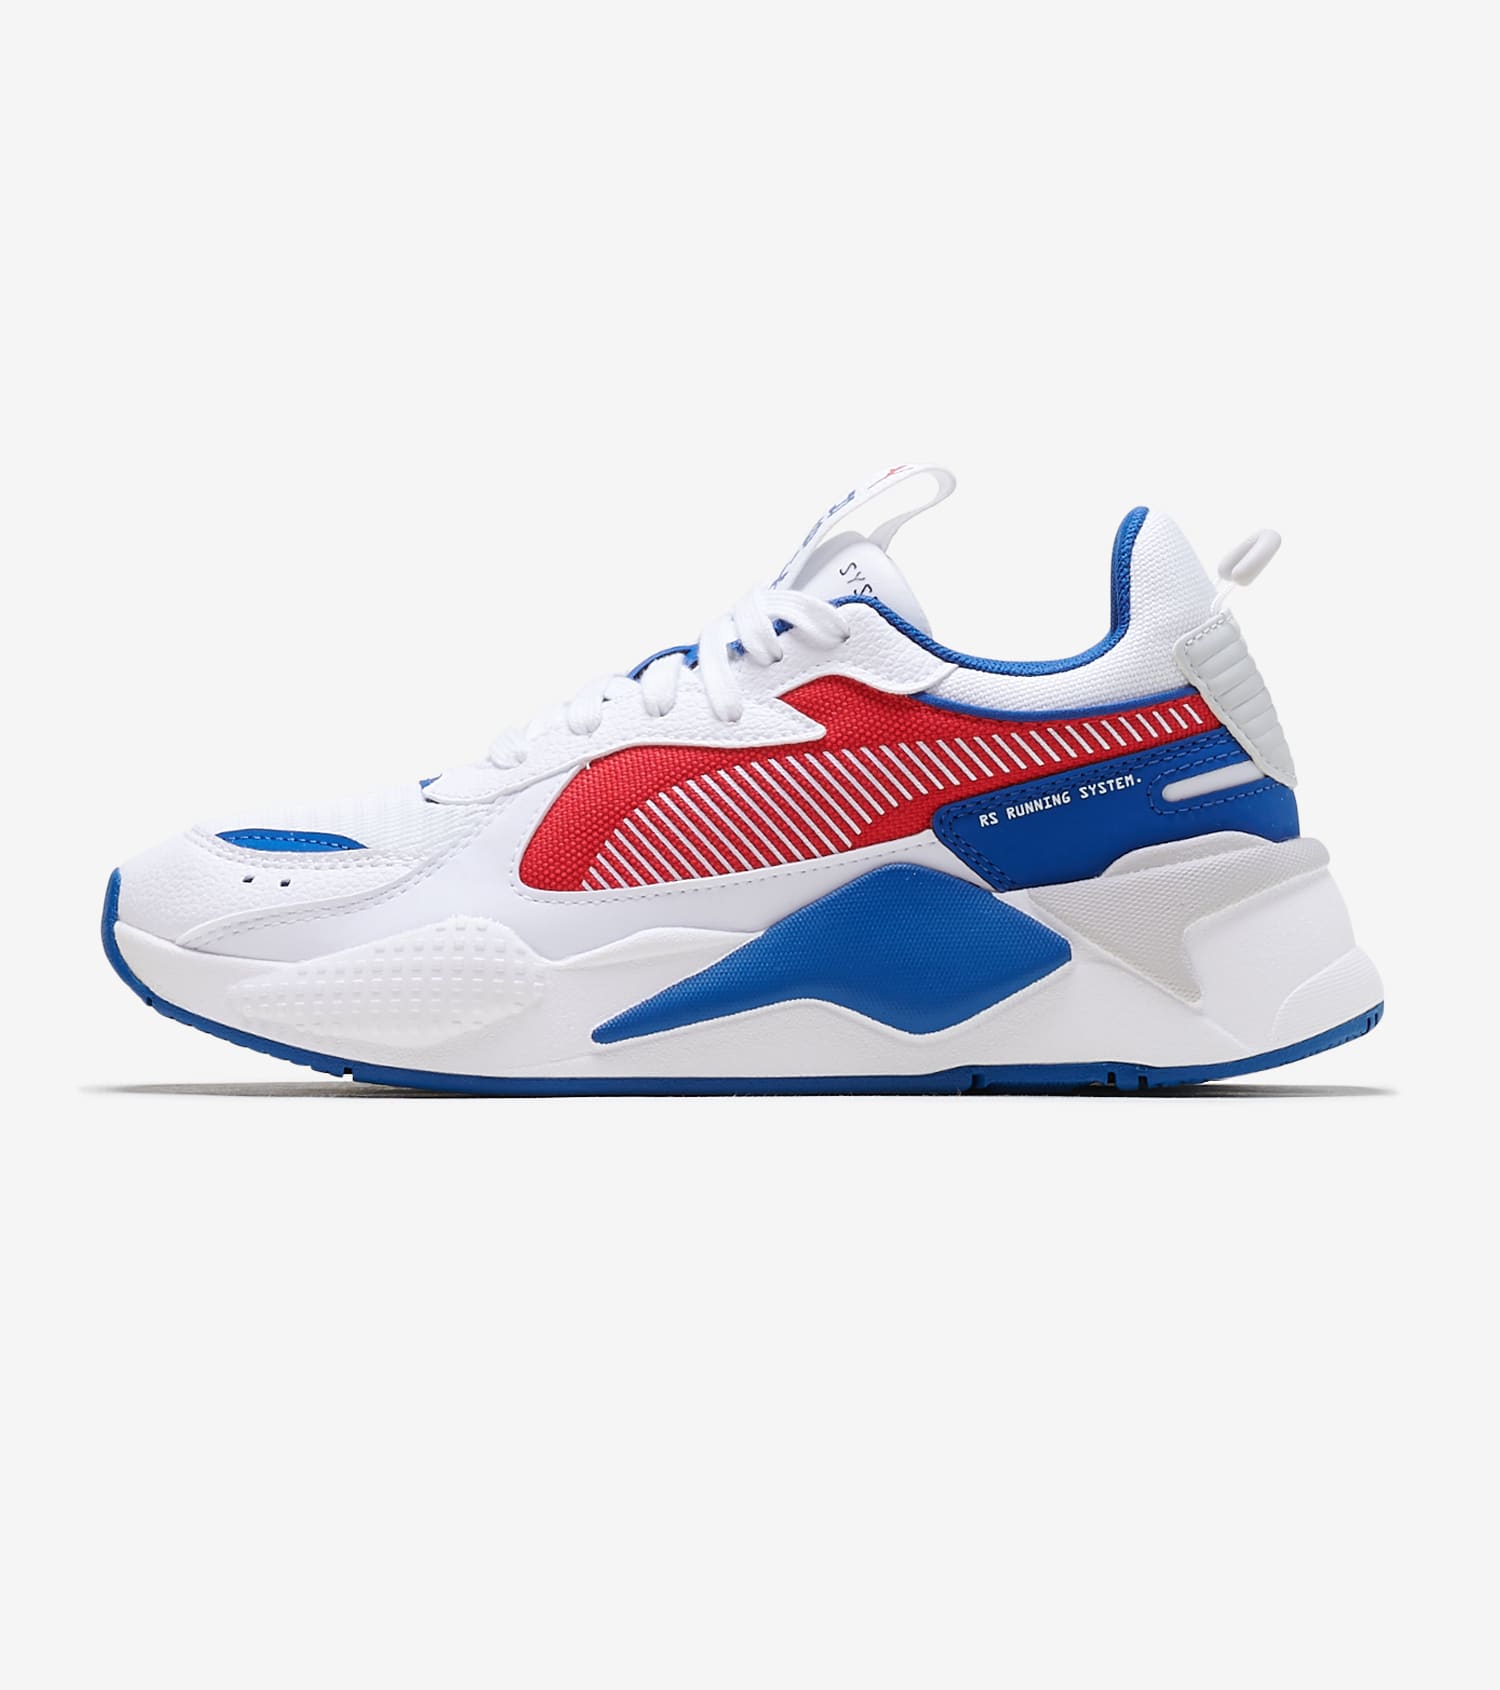 red and blue pumas - 58% OFF 